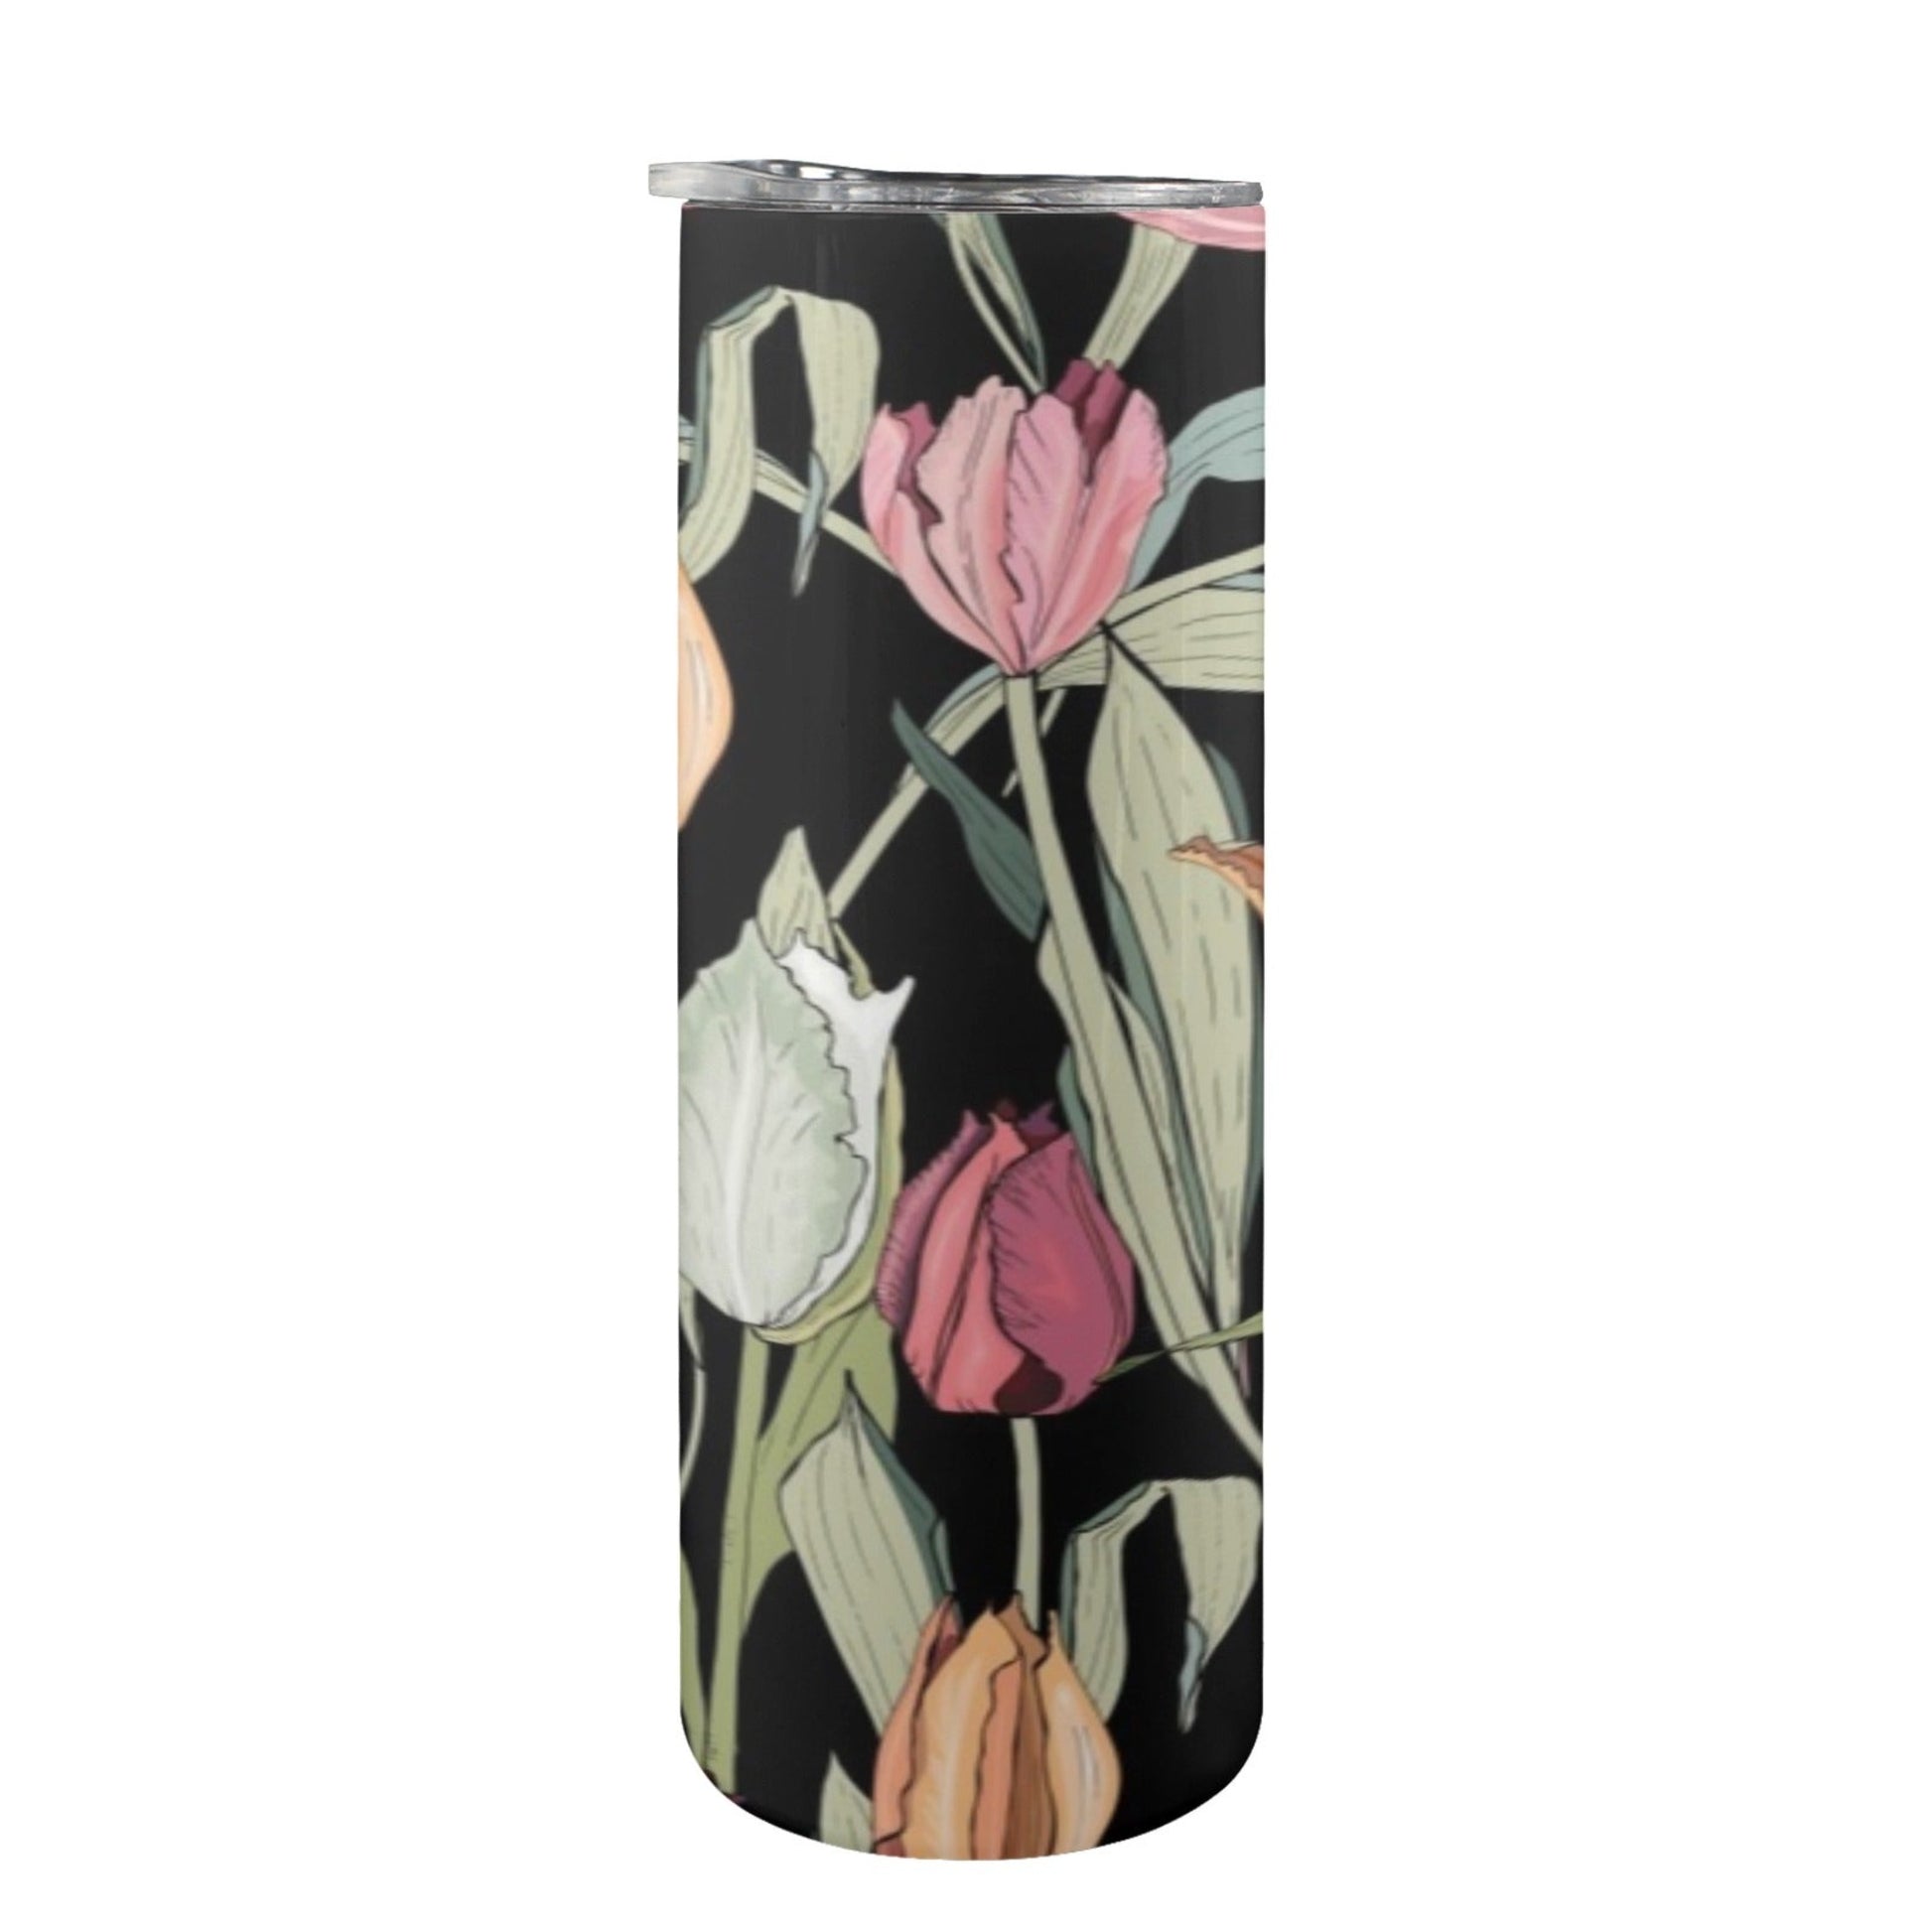 Tulips - 20oz Tall Skinny Tumbler with Lid and Straw 20oz Tall Skinny Tumbler with Lid and Straw